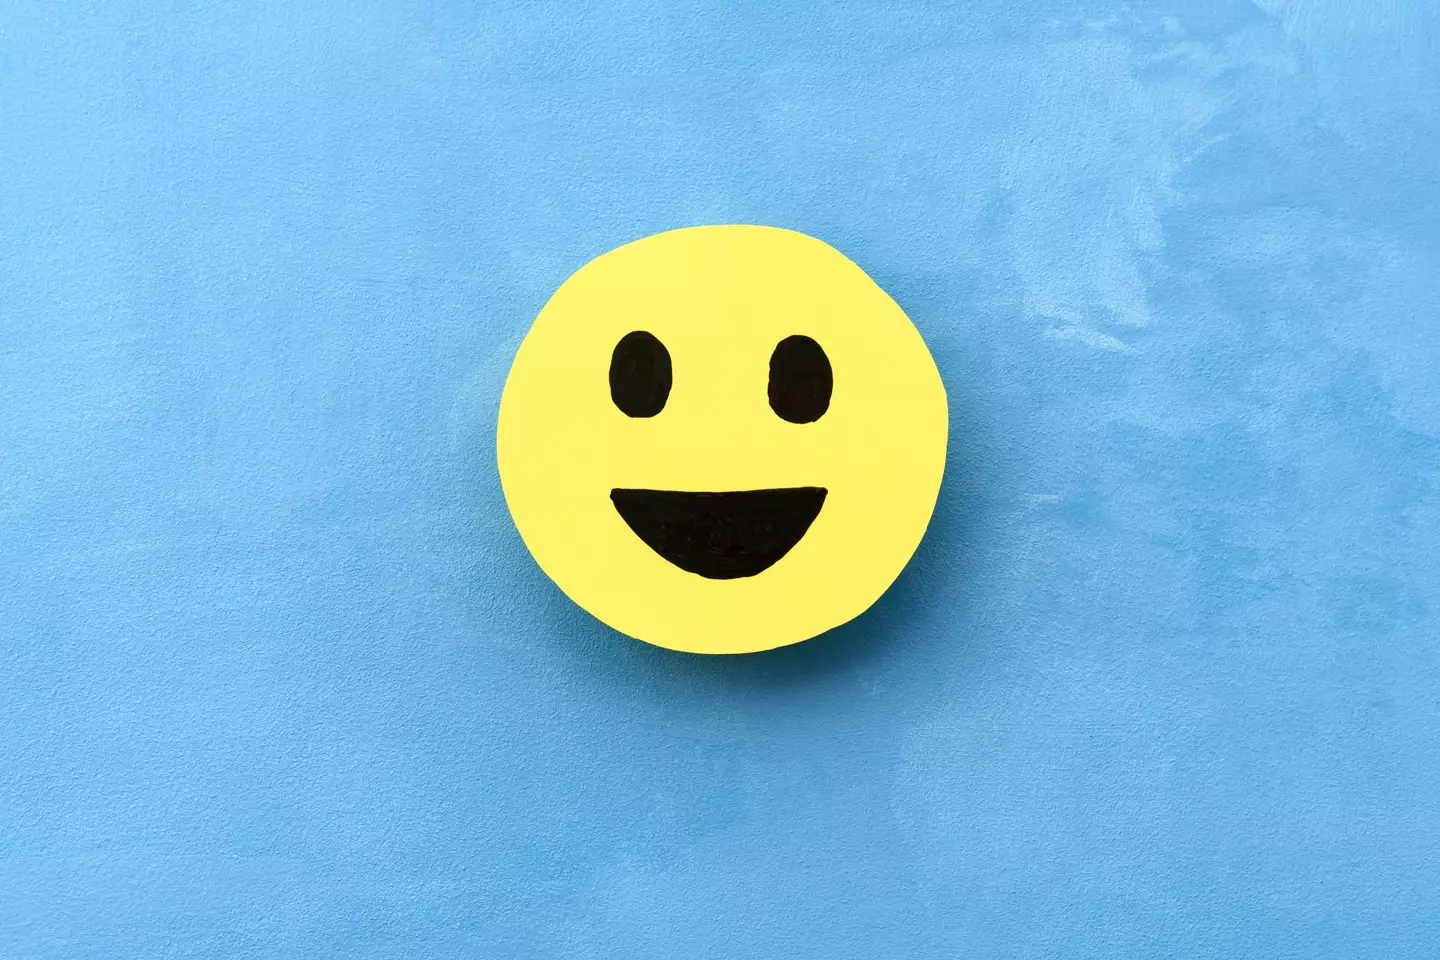 According to the study, a simple smiley faces does the trick.